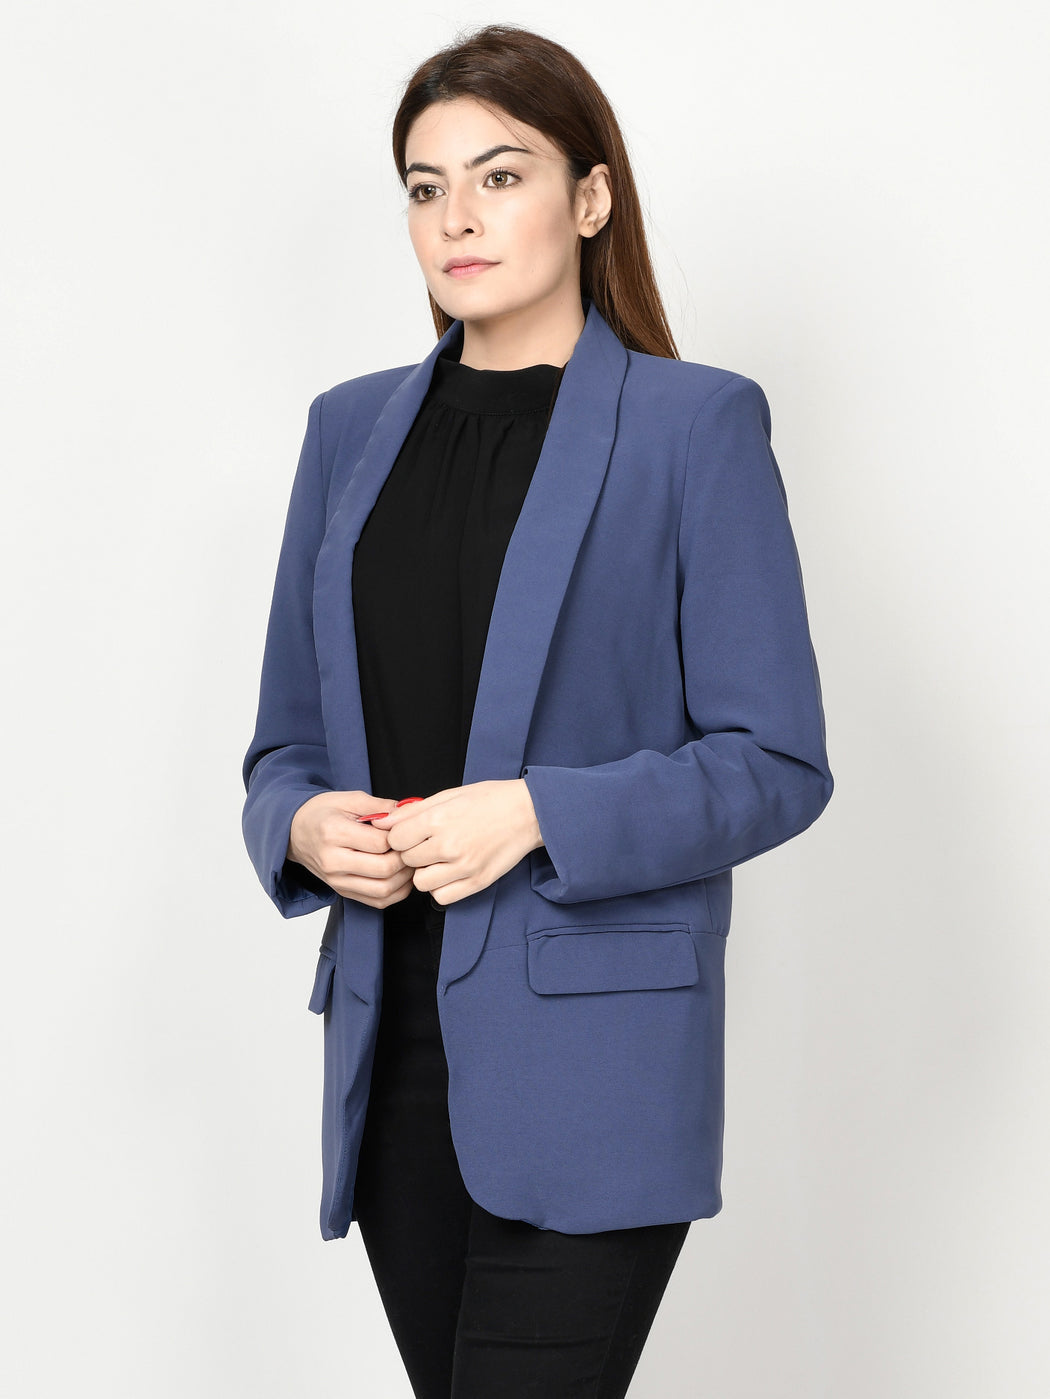 Get Women Winter Collection SALE | Basic Stripped Coat | LIMELIGHT